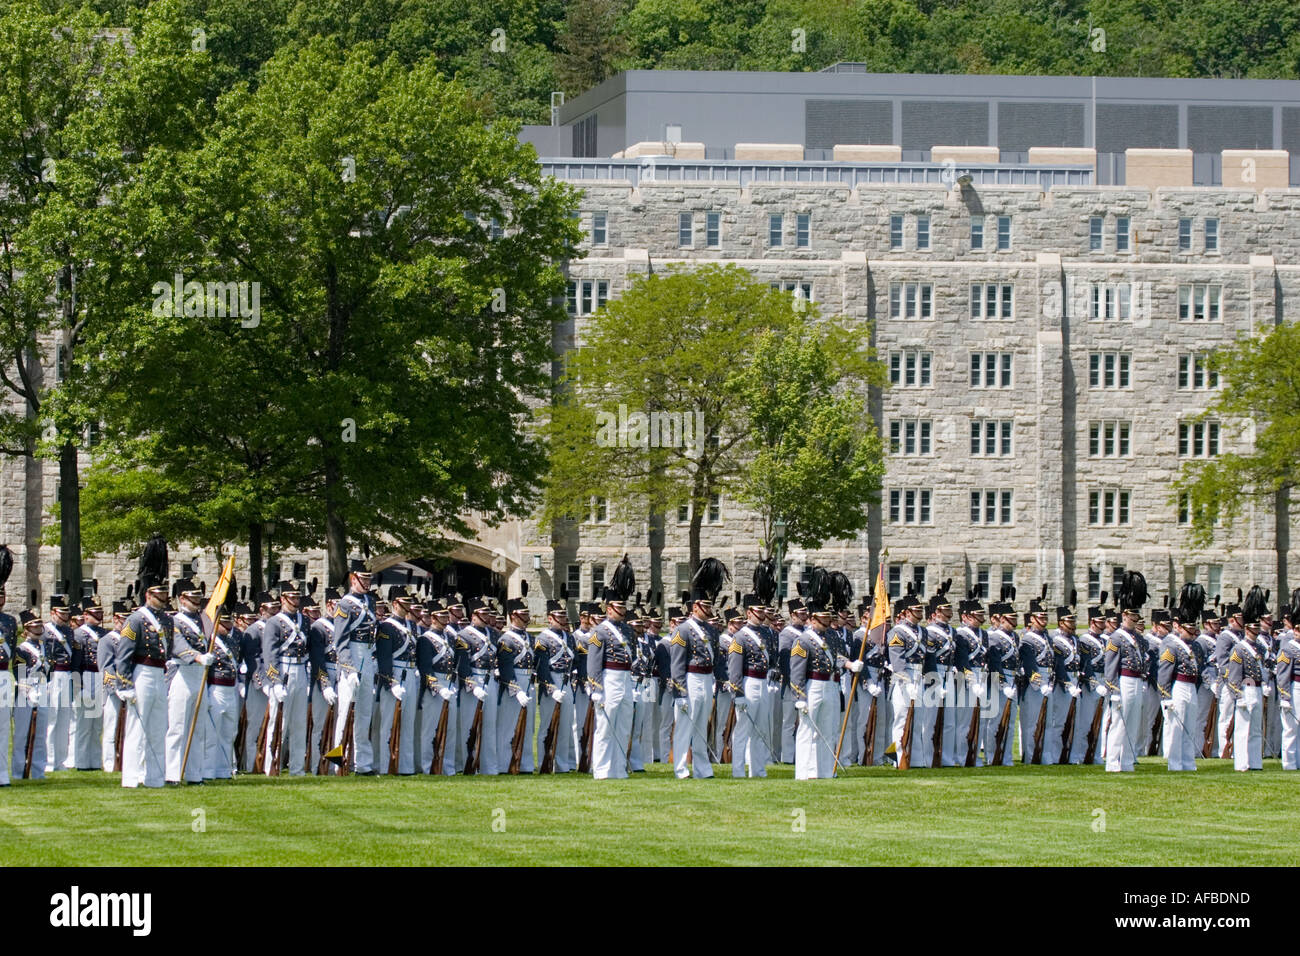 Cadets march on The Plain annual Alumni Review United States Military Academy at West Point Hudson Valley New York Stock Photo